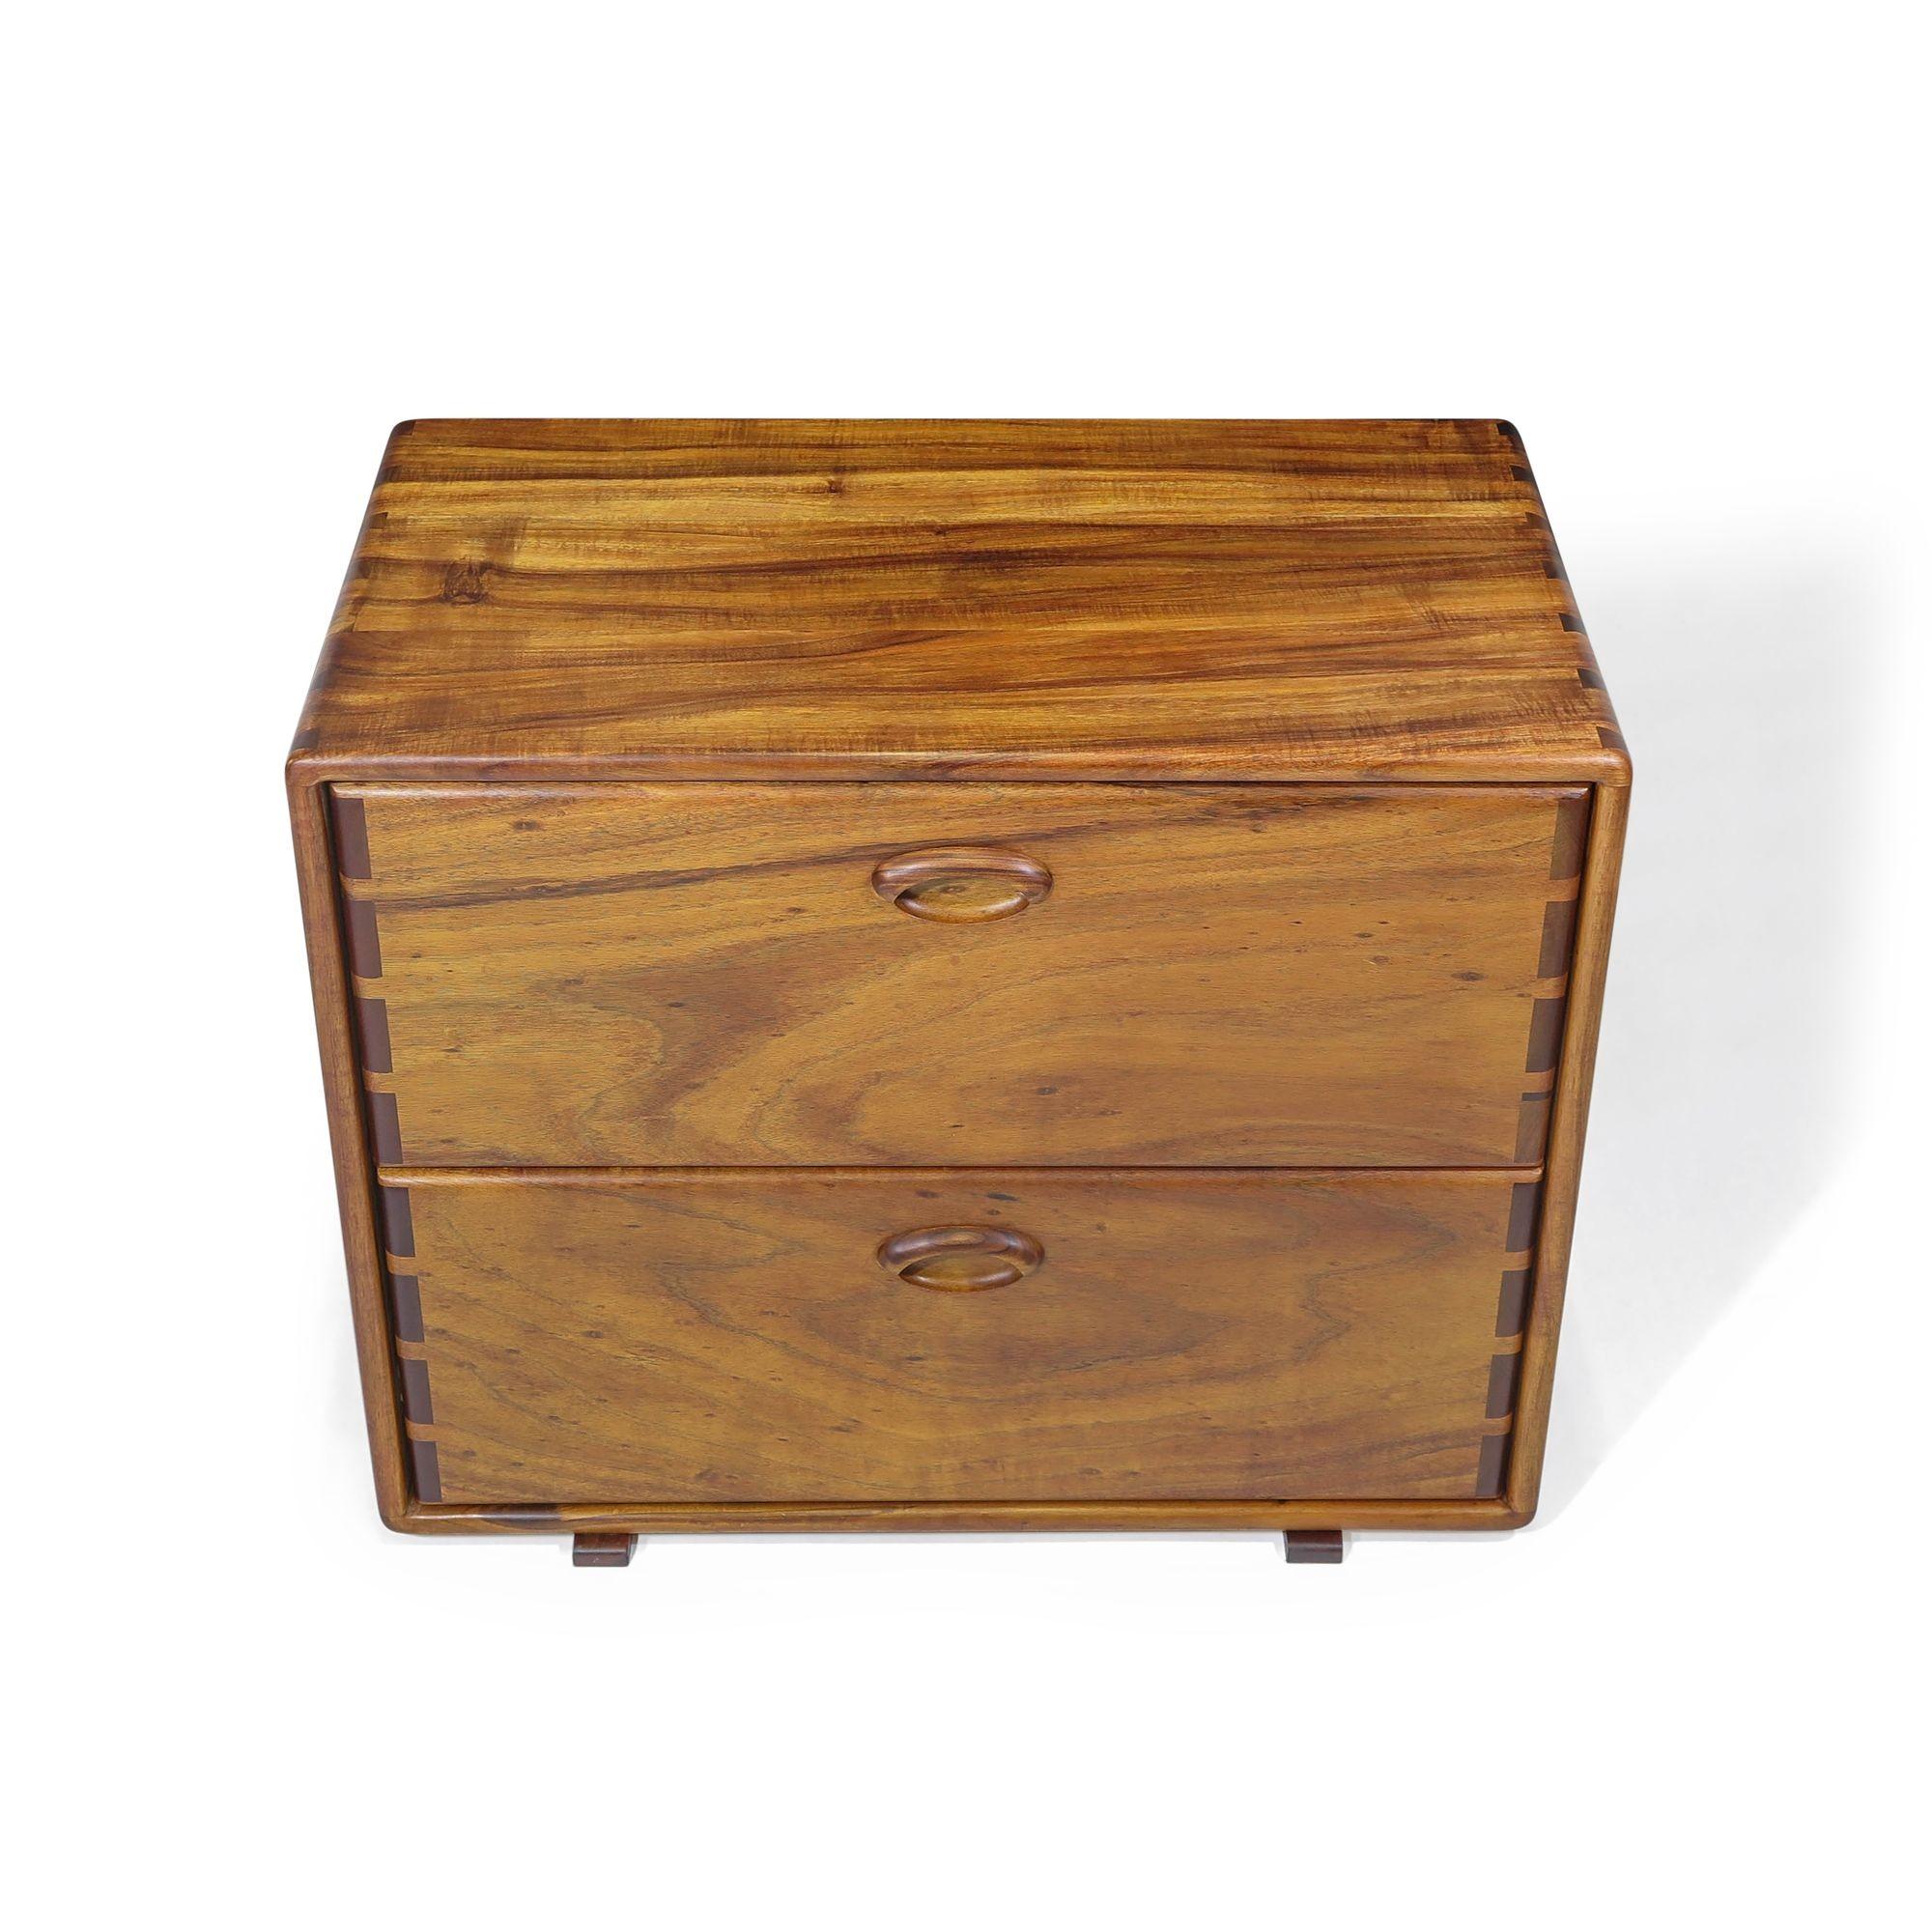 California studio Craft filing cabinet designed by Jim Sweeney, Berkeley, circa 1983. The cabinet is handcrafted of solid Koa wood, and features two filing drawers with boldly exposed joinery on the cabinet and drawers. The cabinets have been